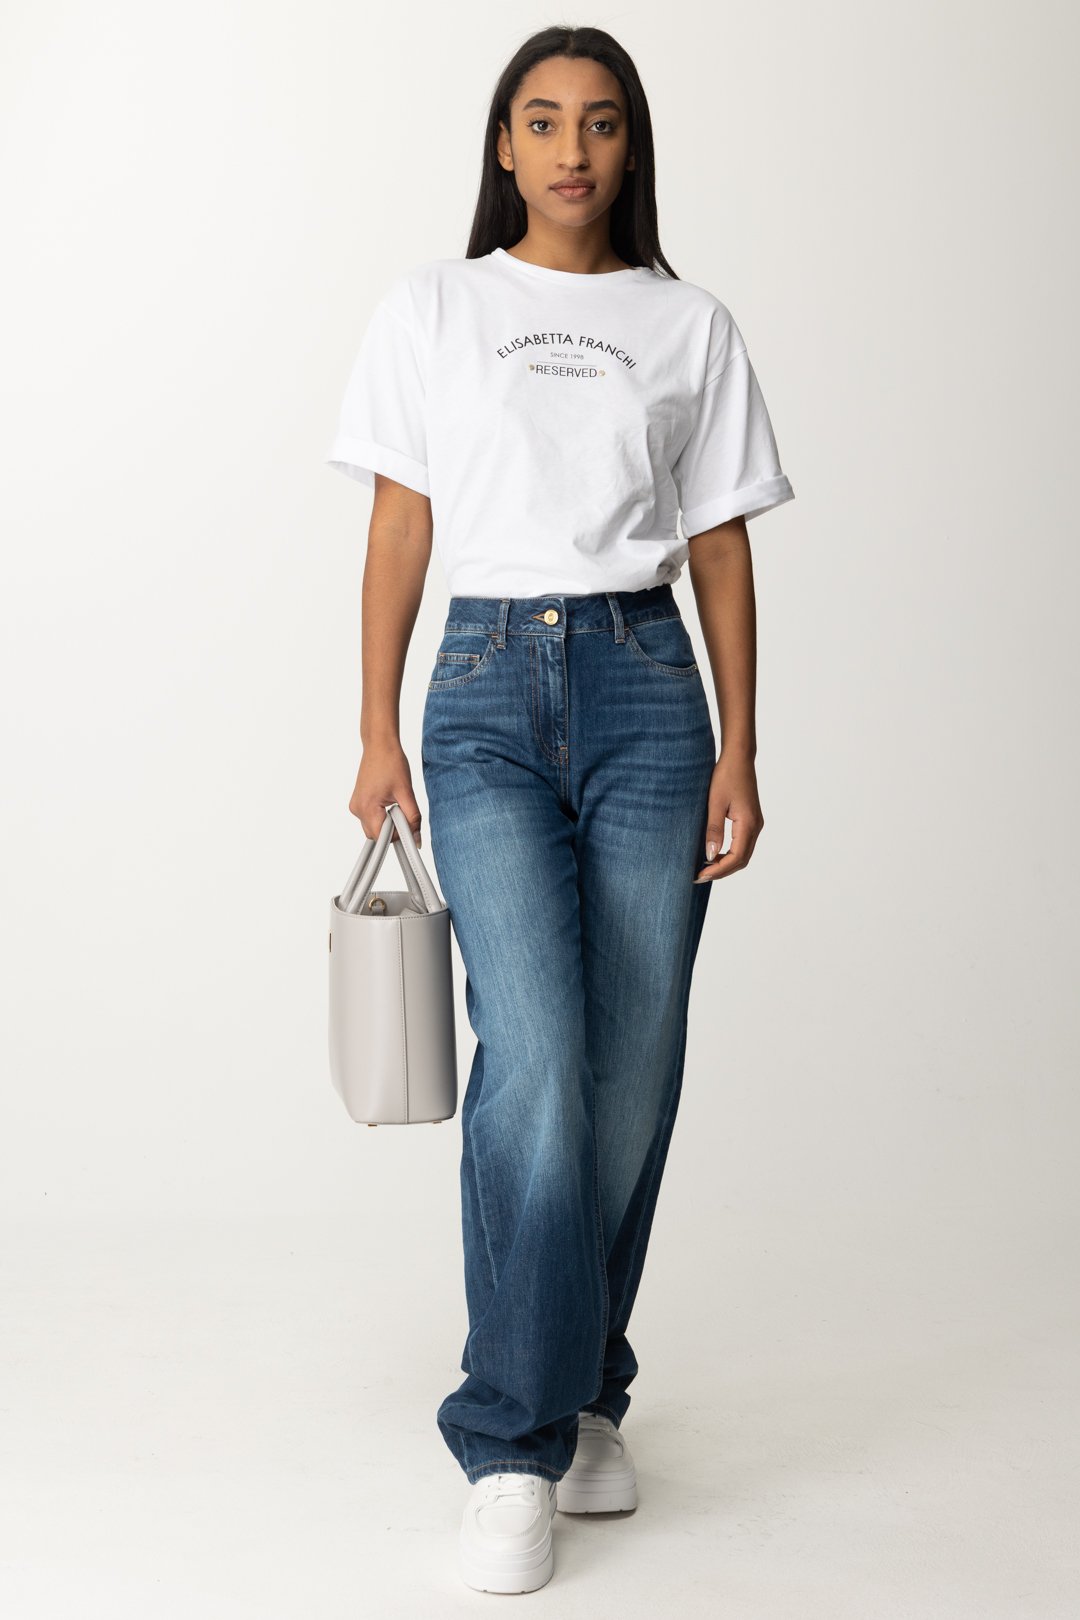 Preview: Elisabetta Franchi T-shirt with Reserved Print Gesso